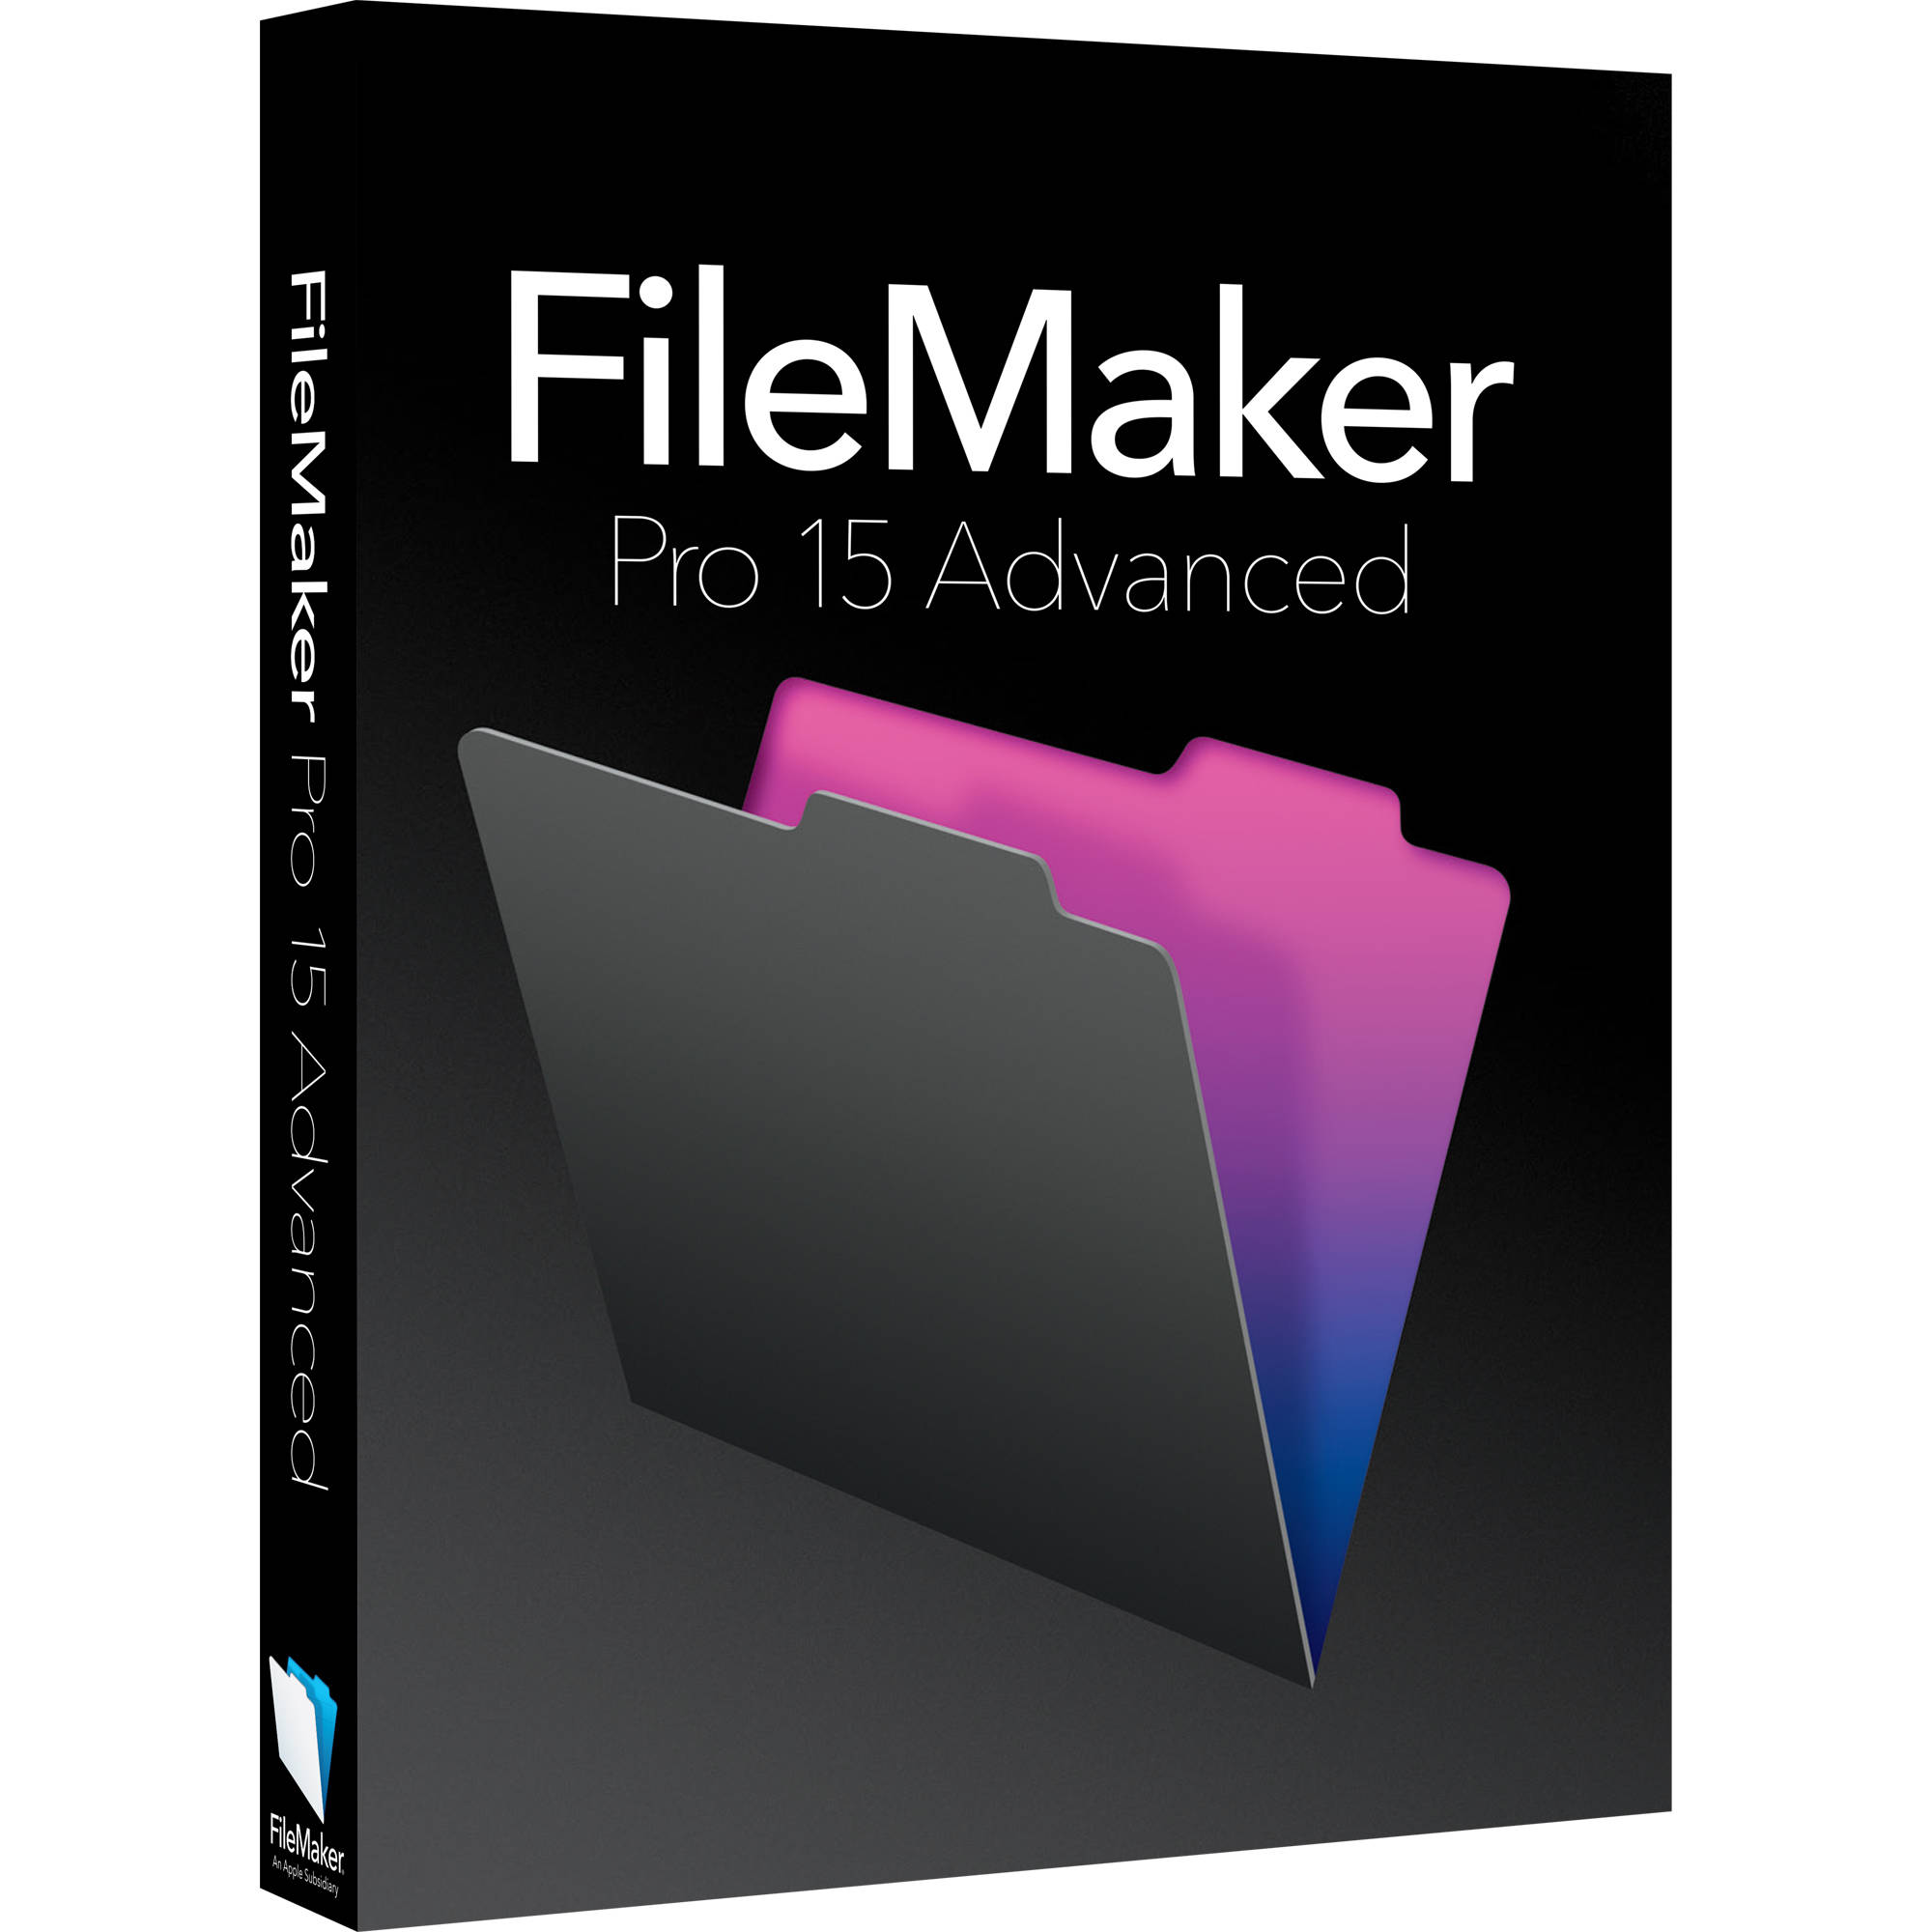 filemaker pro 11 download trial